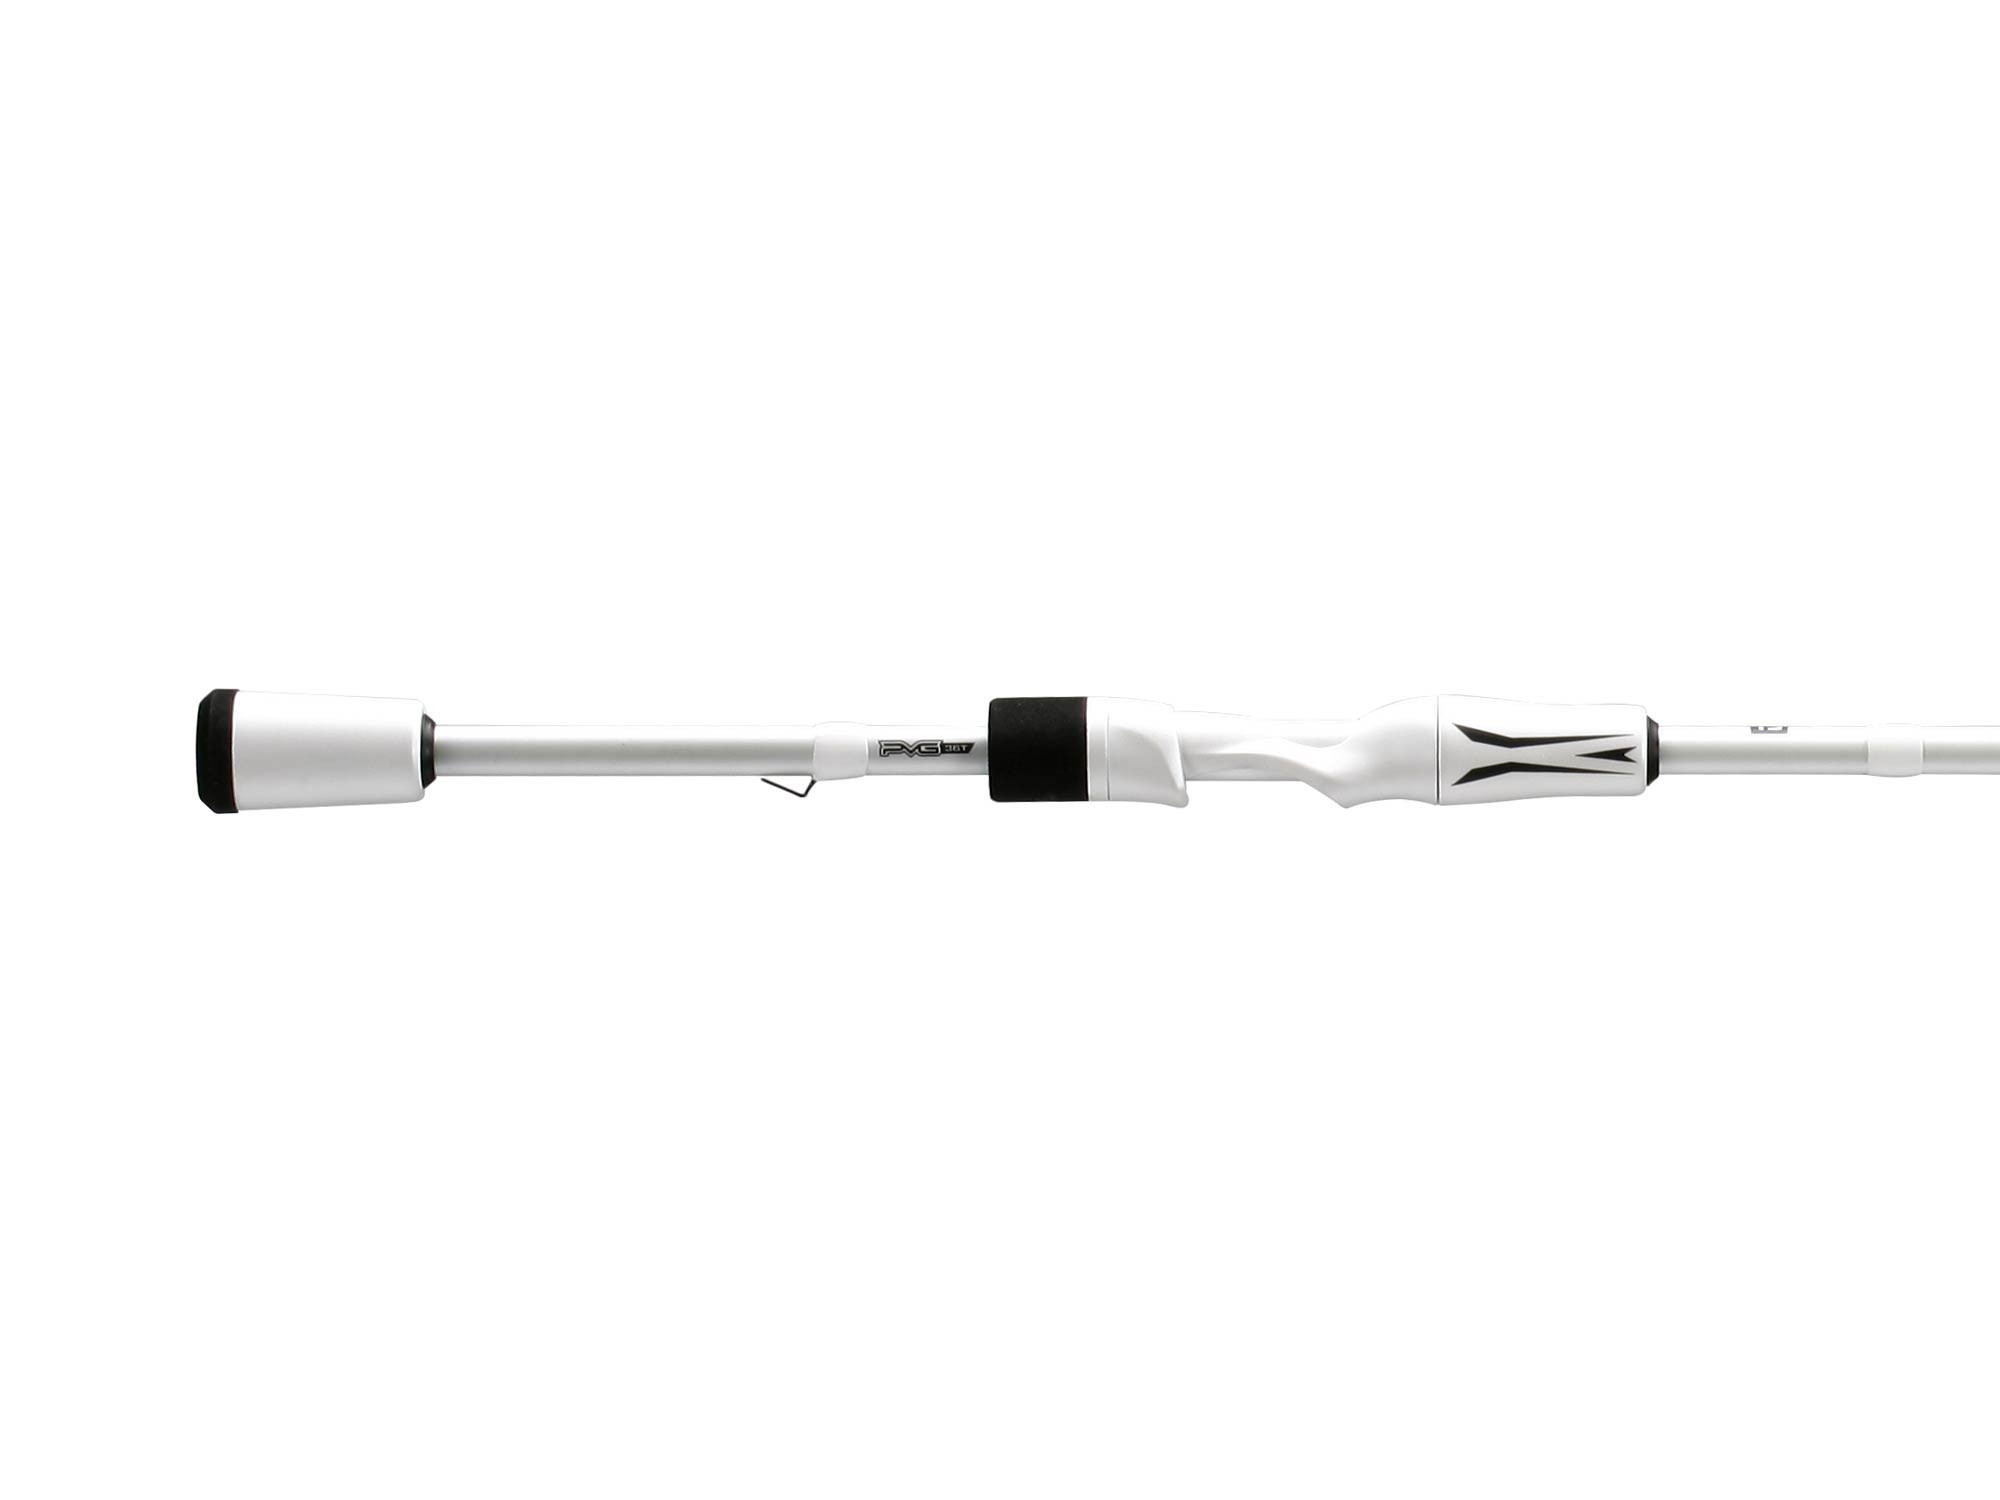  13 FISHING - Fate V3 6'7 M Casting Rod (Short Handle* Hook  Keeper is Above The Reel seat) - FV3C67M White